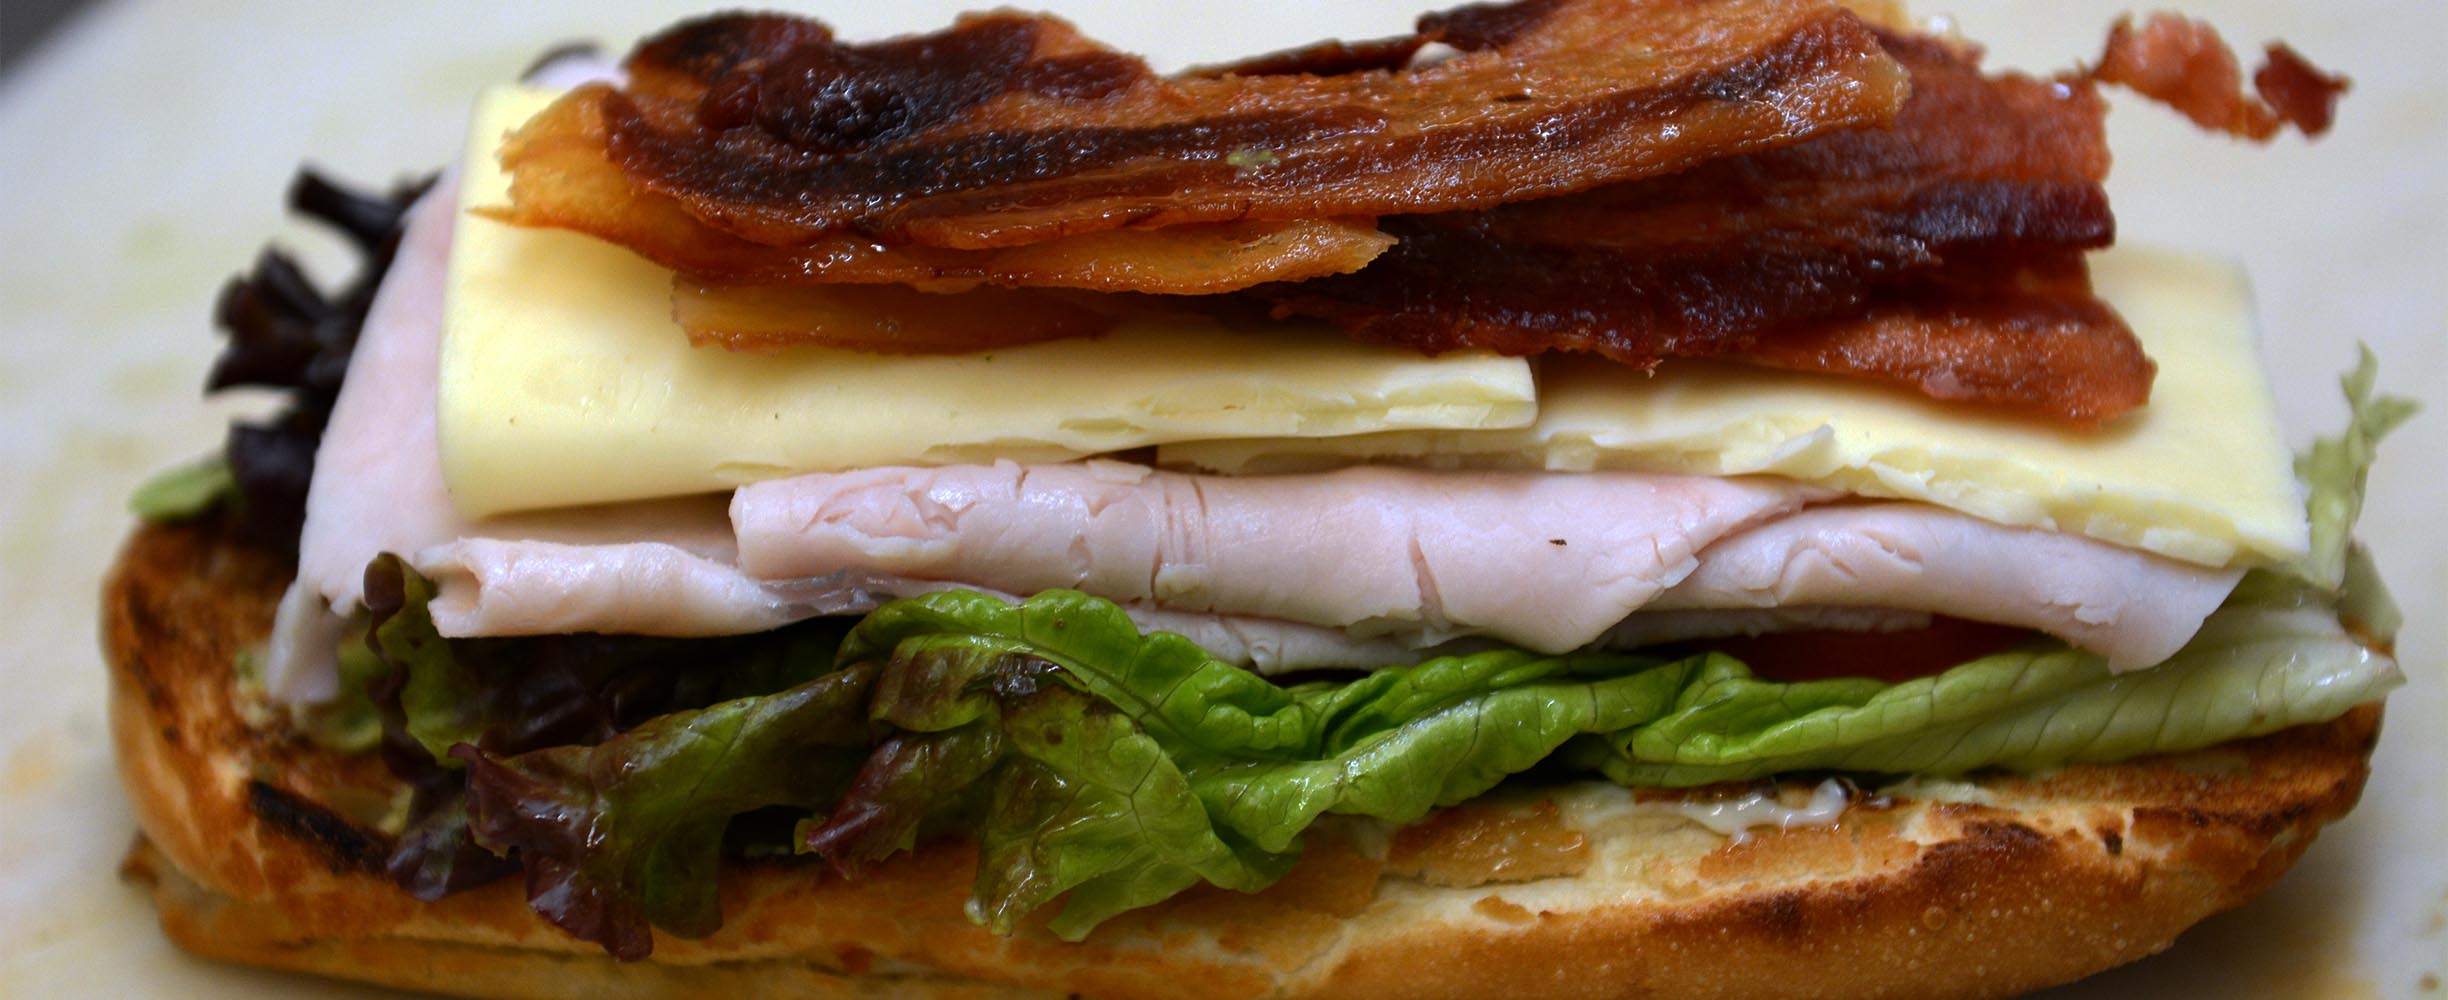 A sandwich with bacon, cheese, turkey, lettuce and tomato plus mayonnaise and spices is just fantastic!